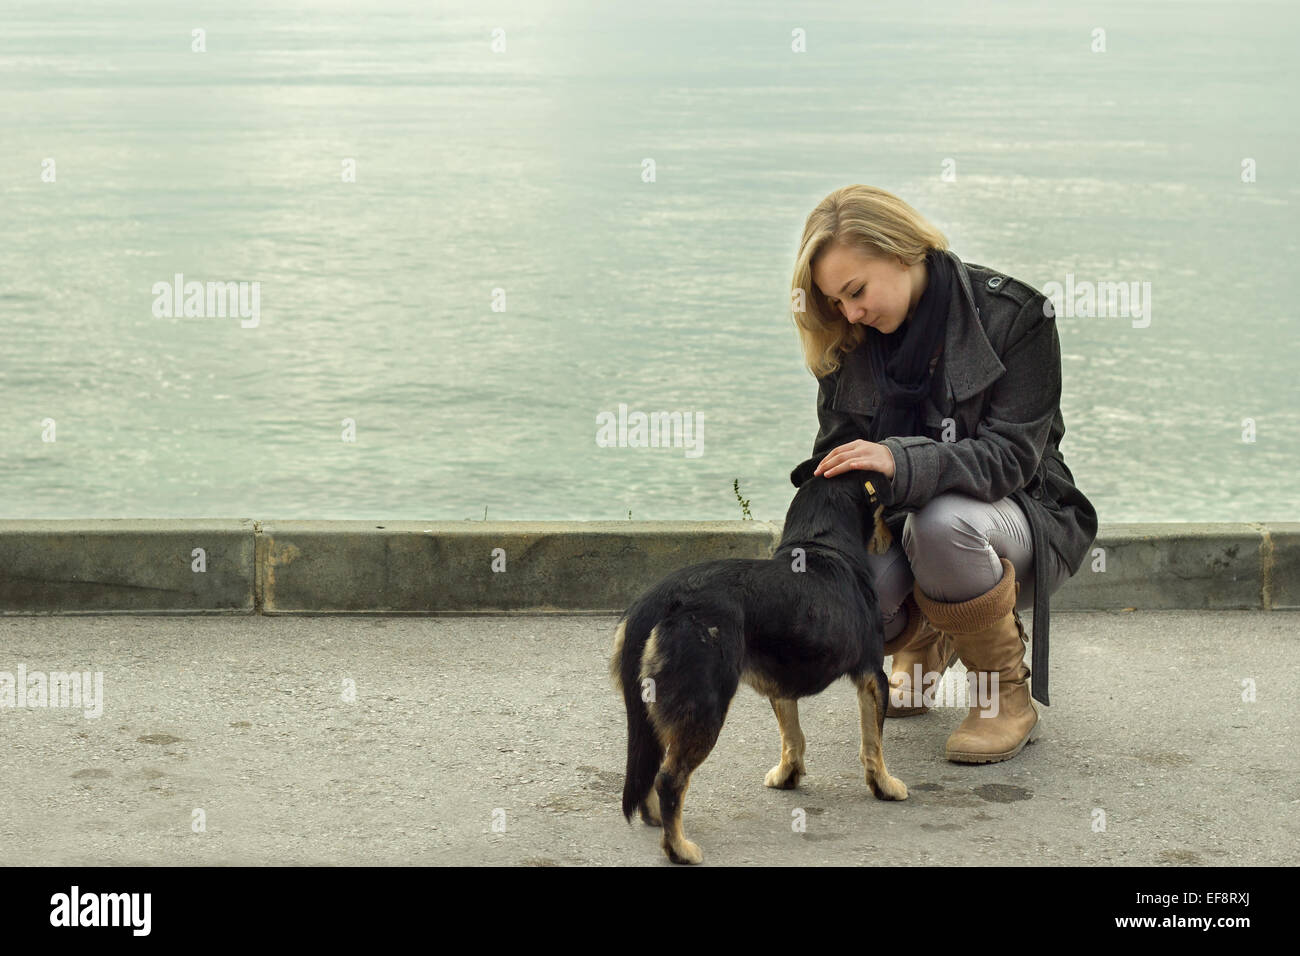 Girl (12-13) with dog outdoors Stock Photo